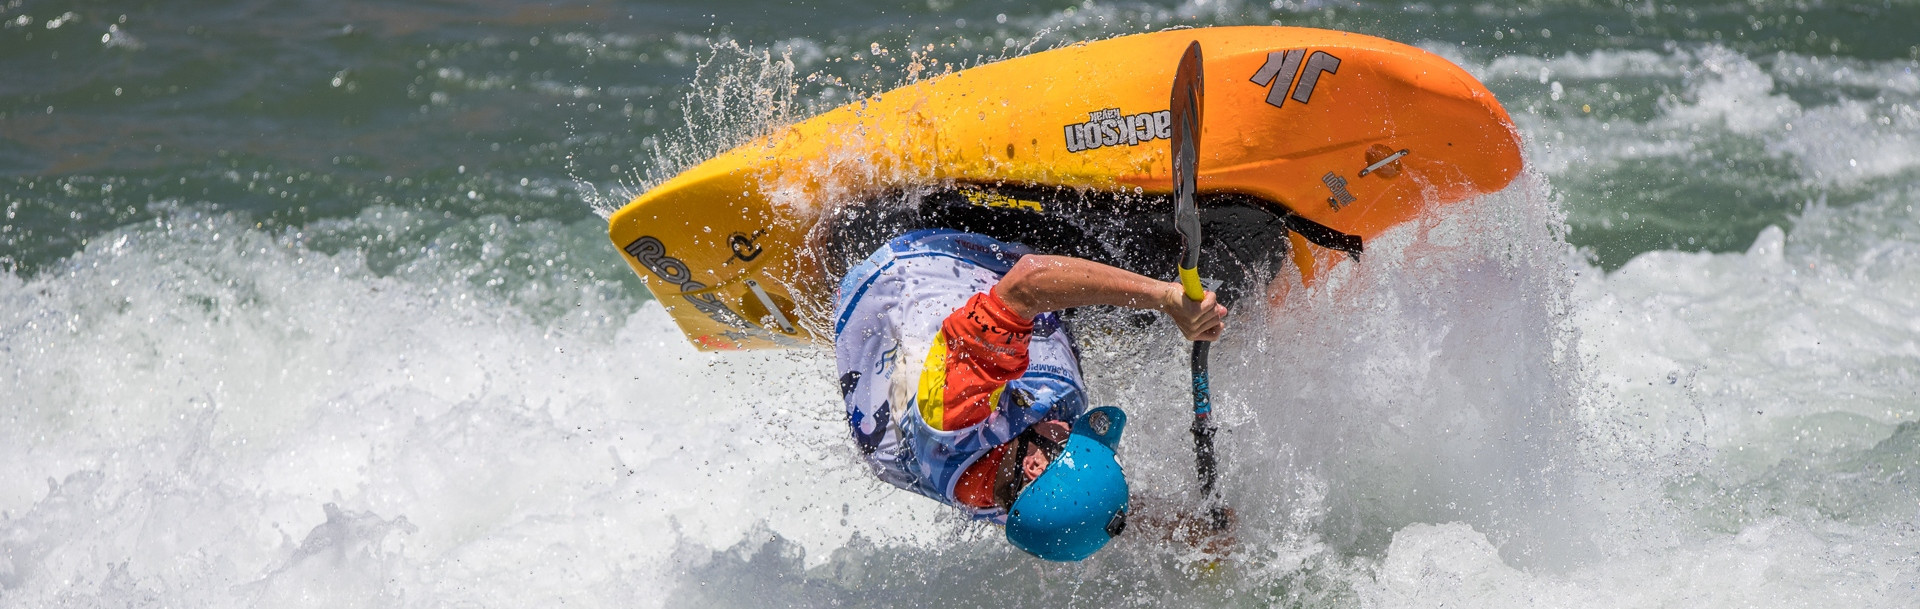 France's Tom Dolle cruised into the men's kayak junior final ©ICF